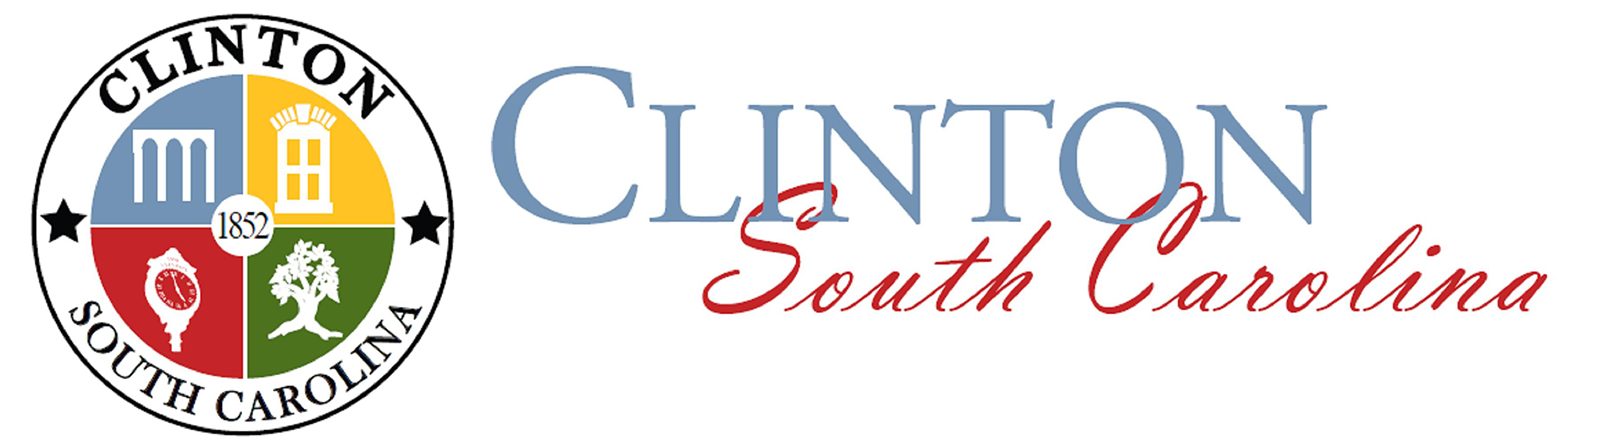 City of Clinton LCCC